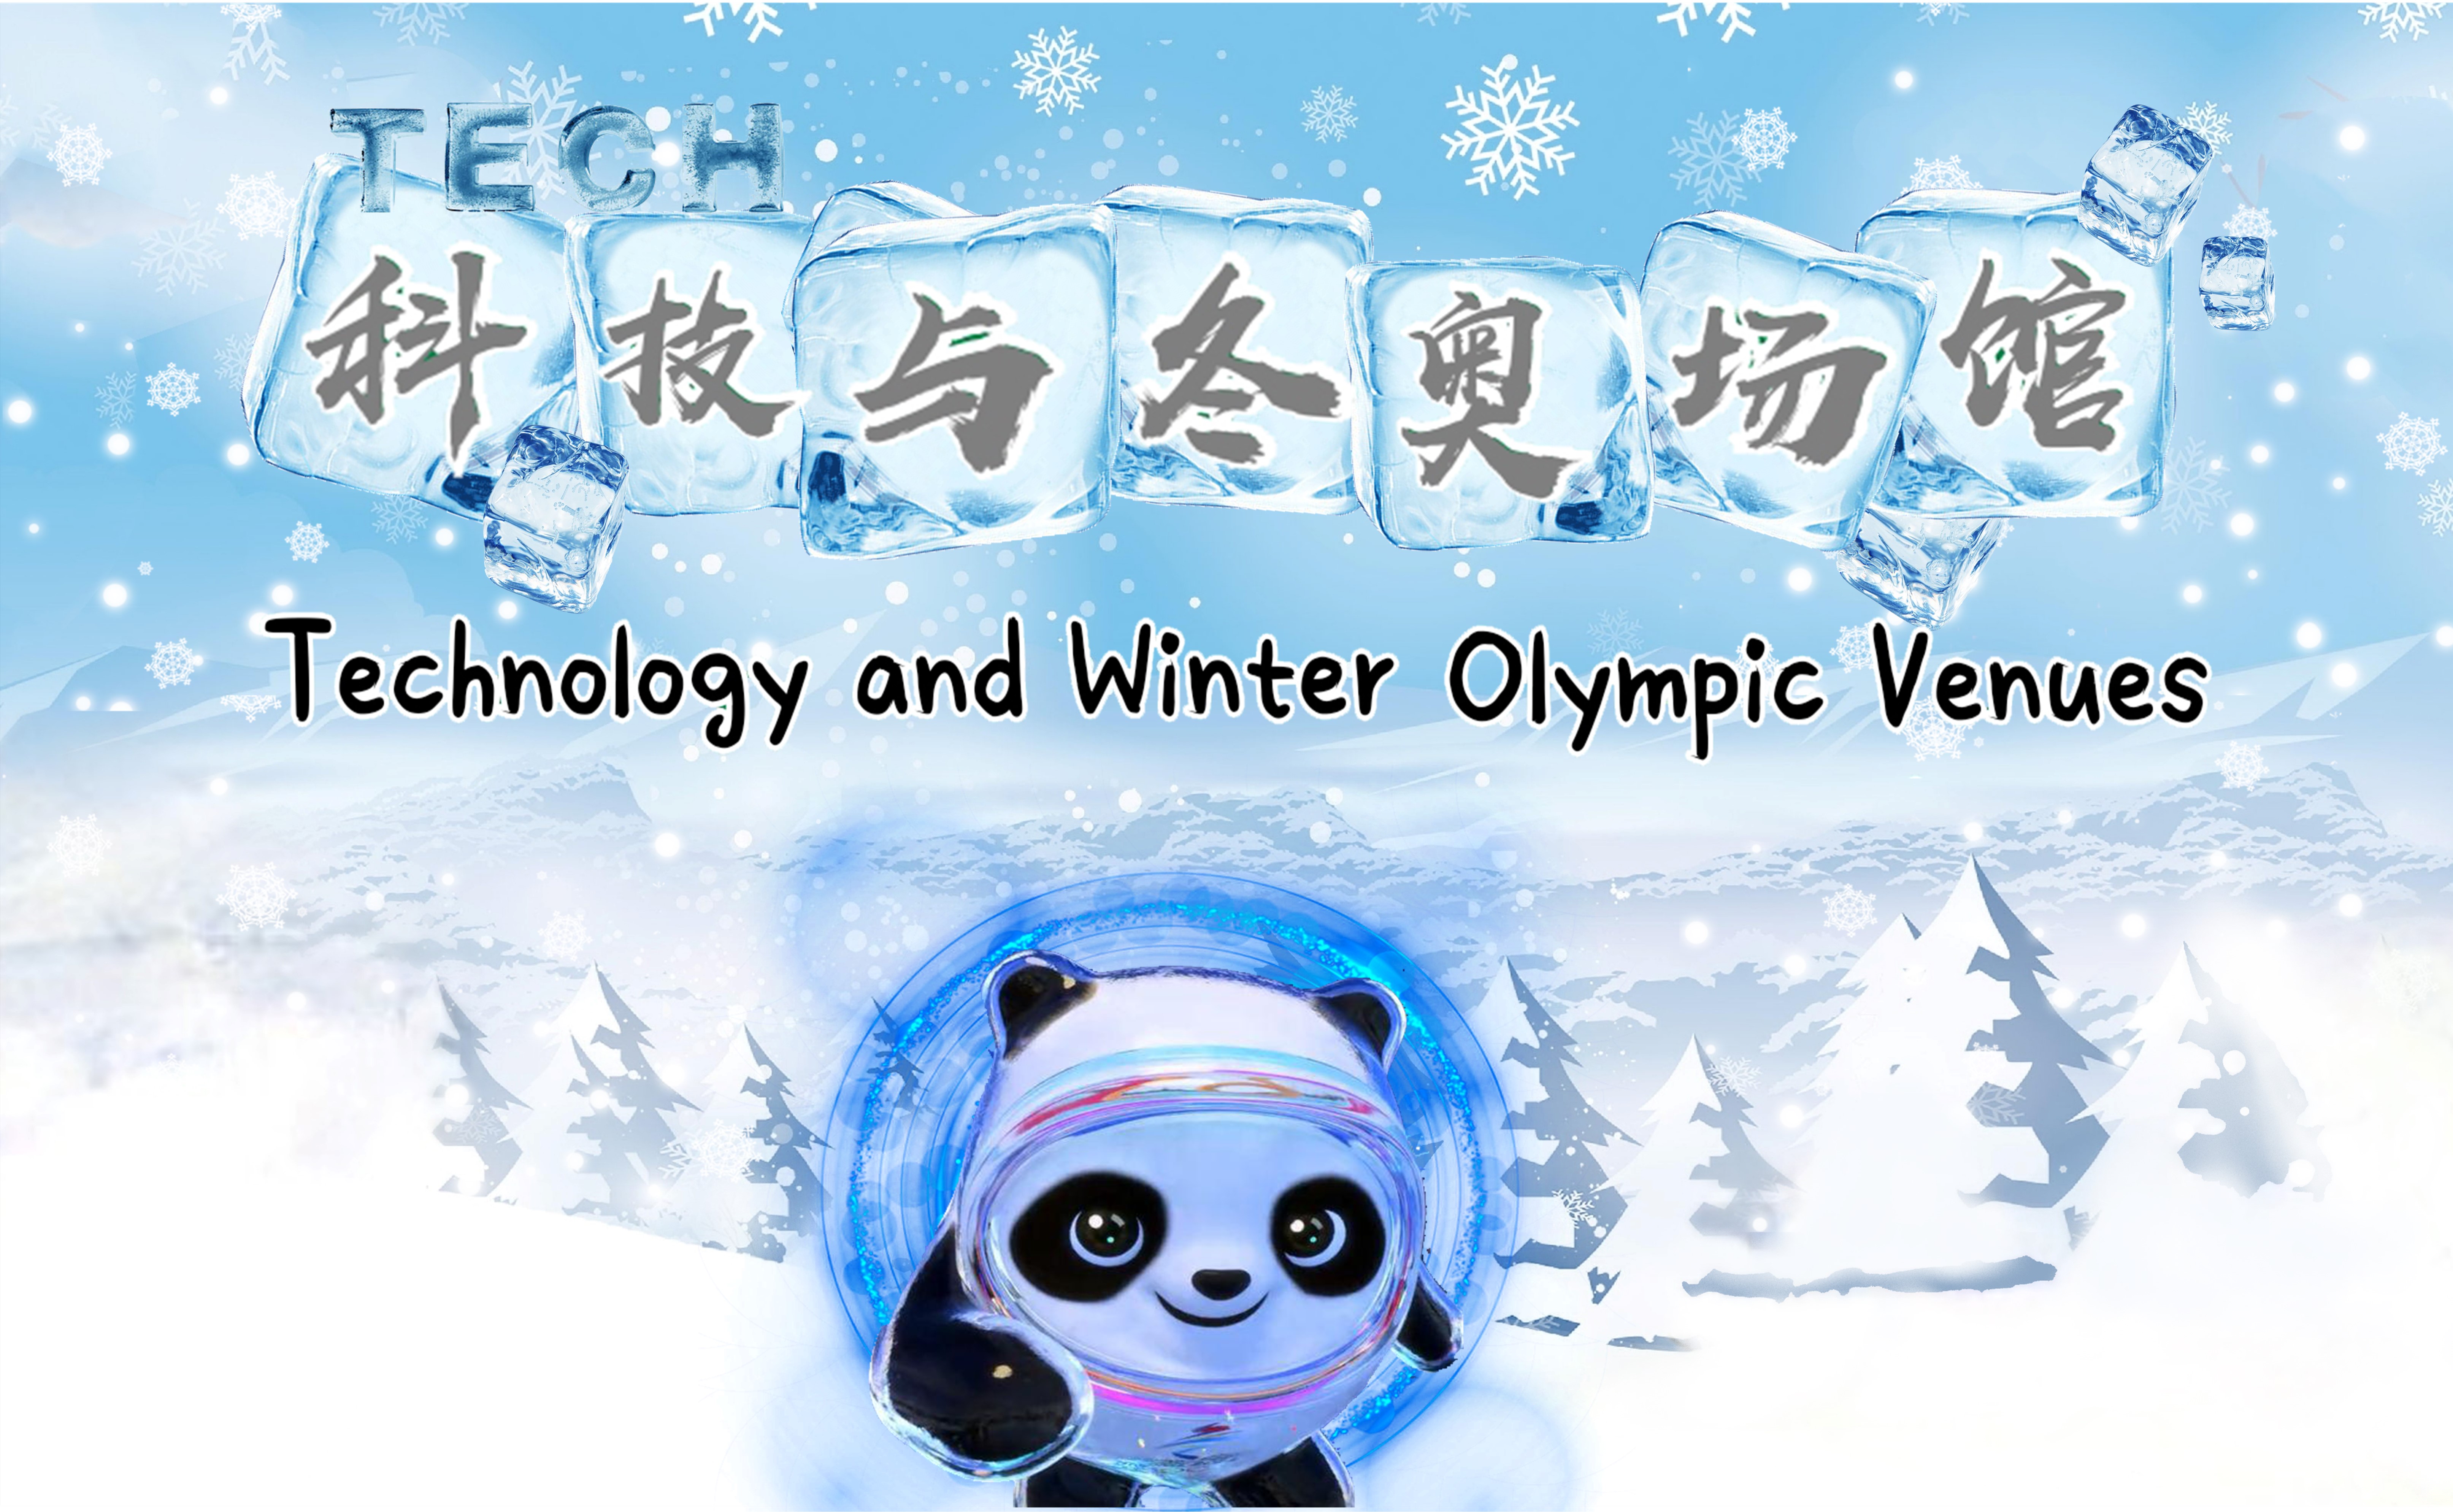 Technology and Winter Olympic Venues